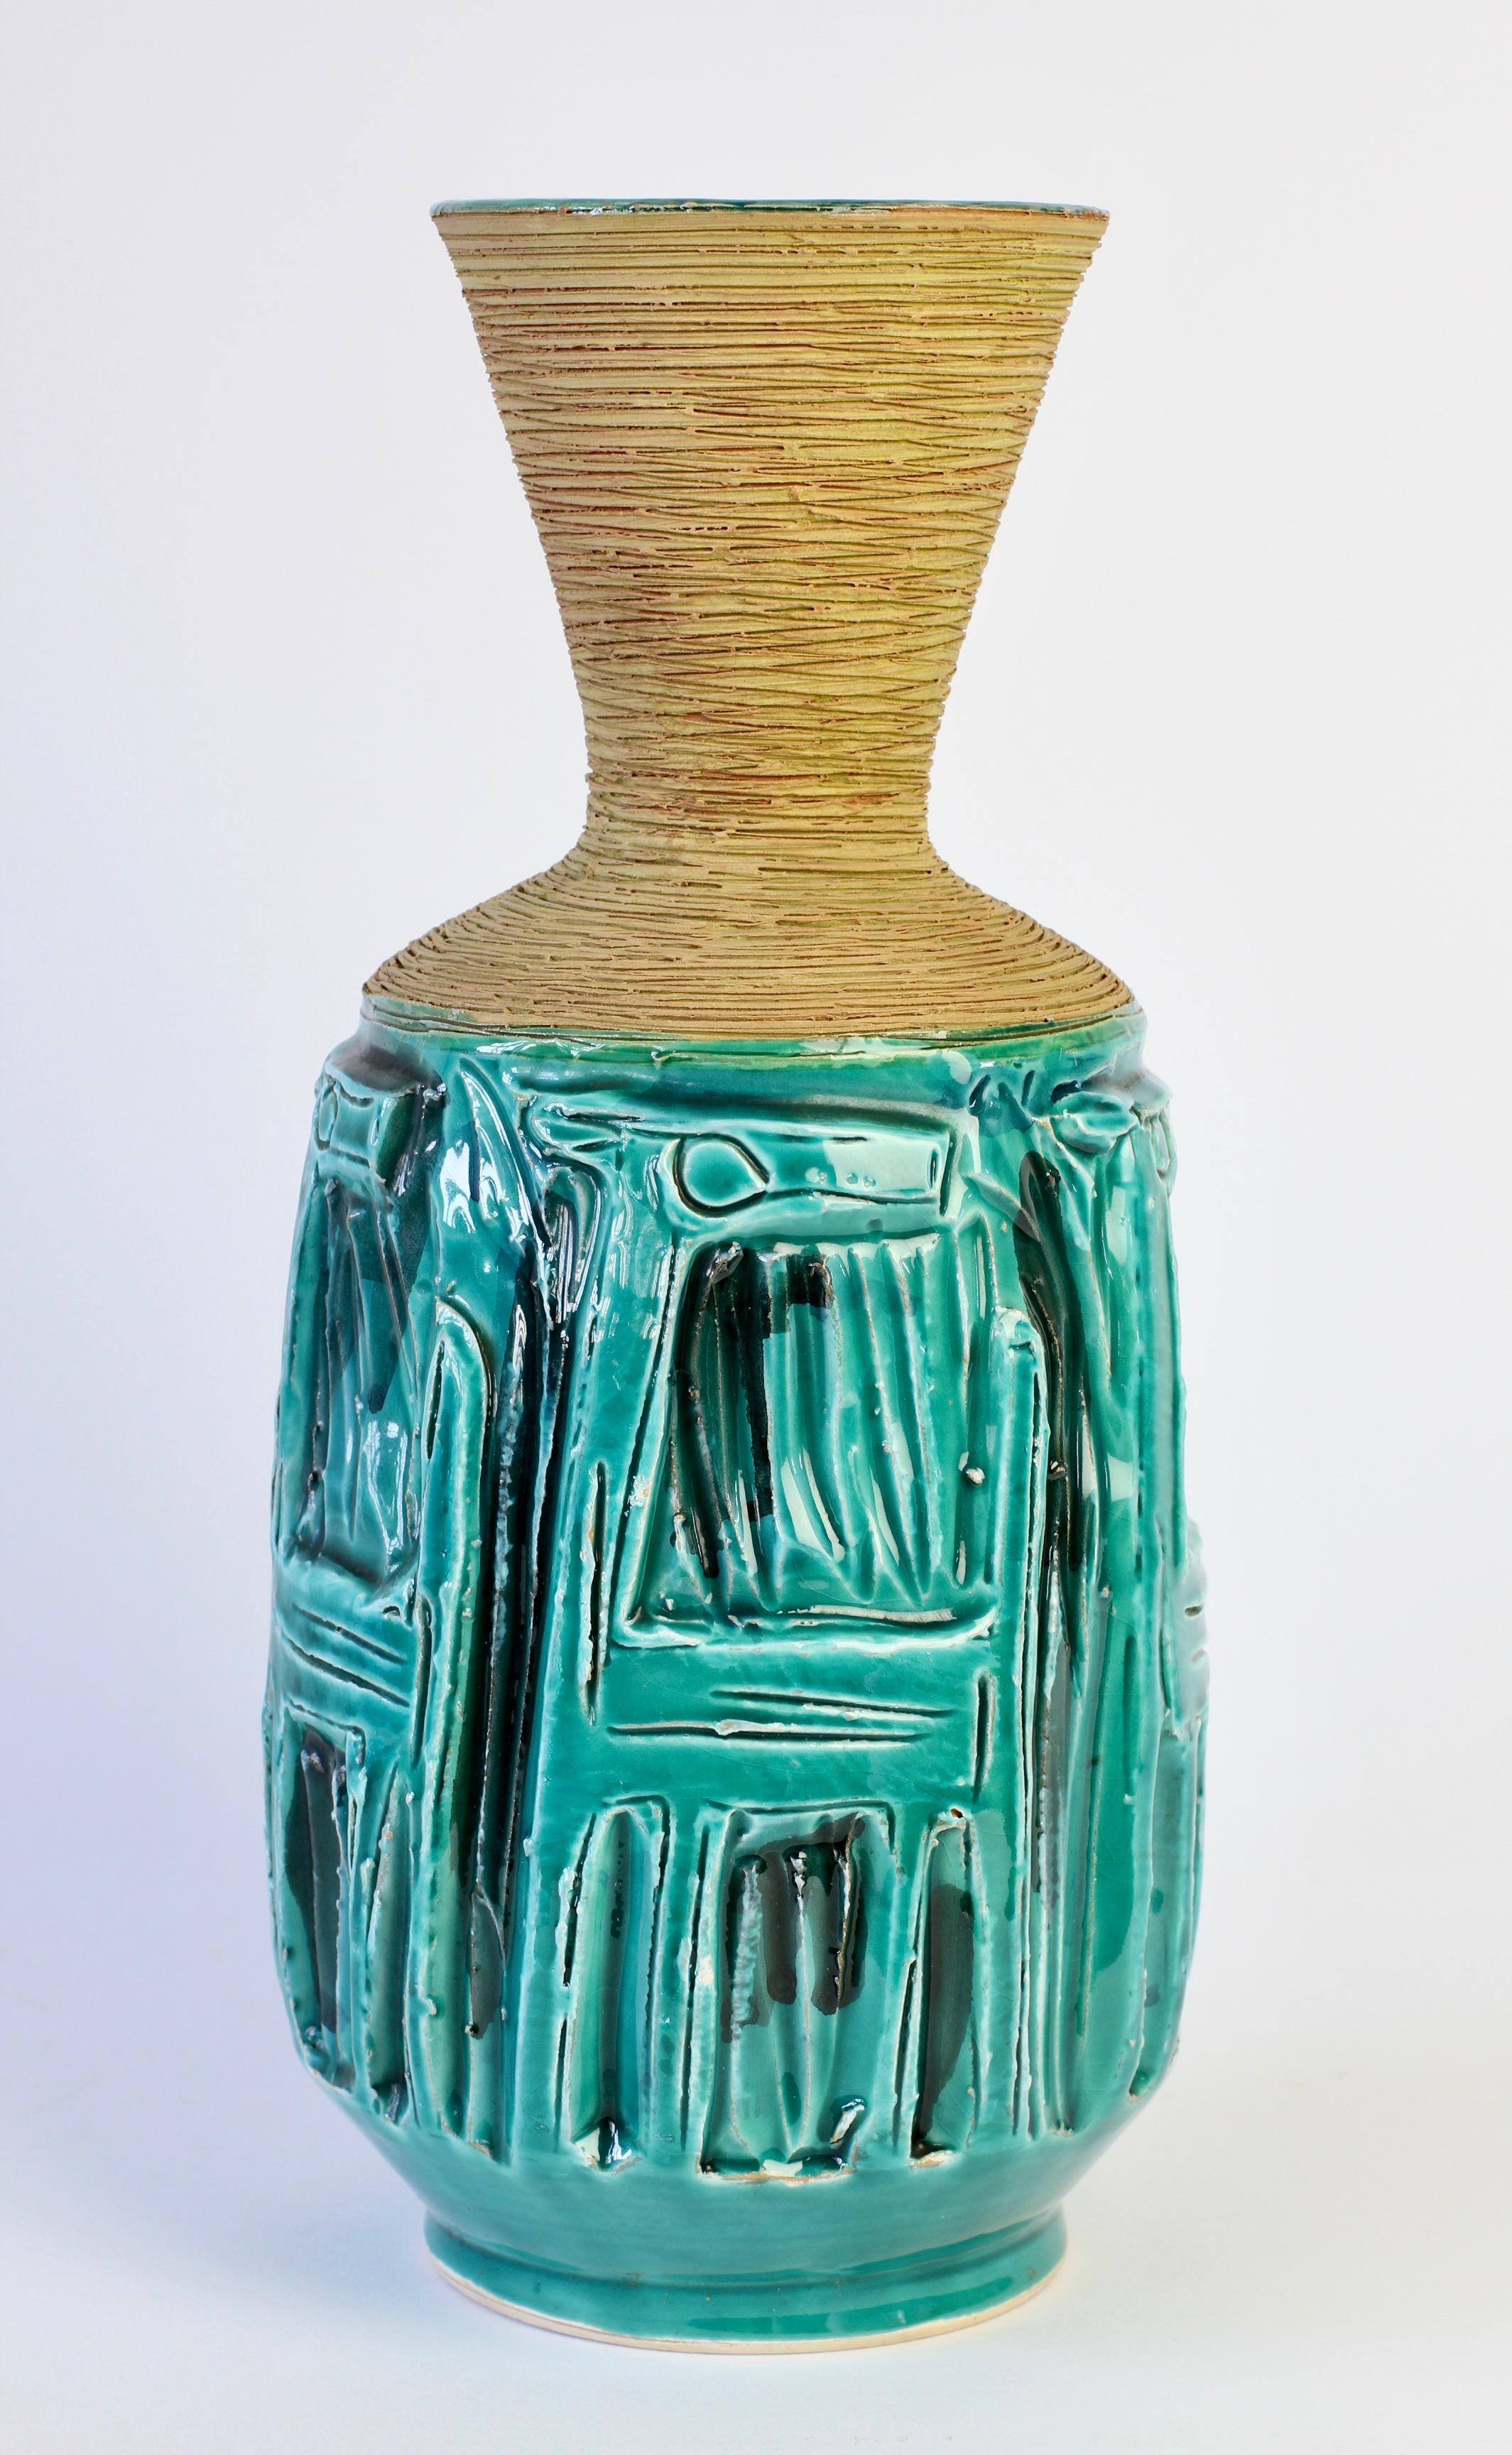 Clay Midcentury Turquoise Italian Ceramic Vase by Fratelli Fanciullacci, circa 1960 For Sale